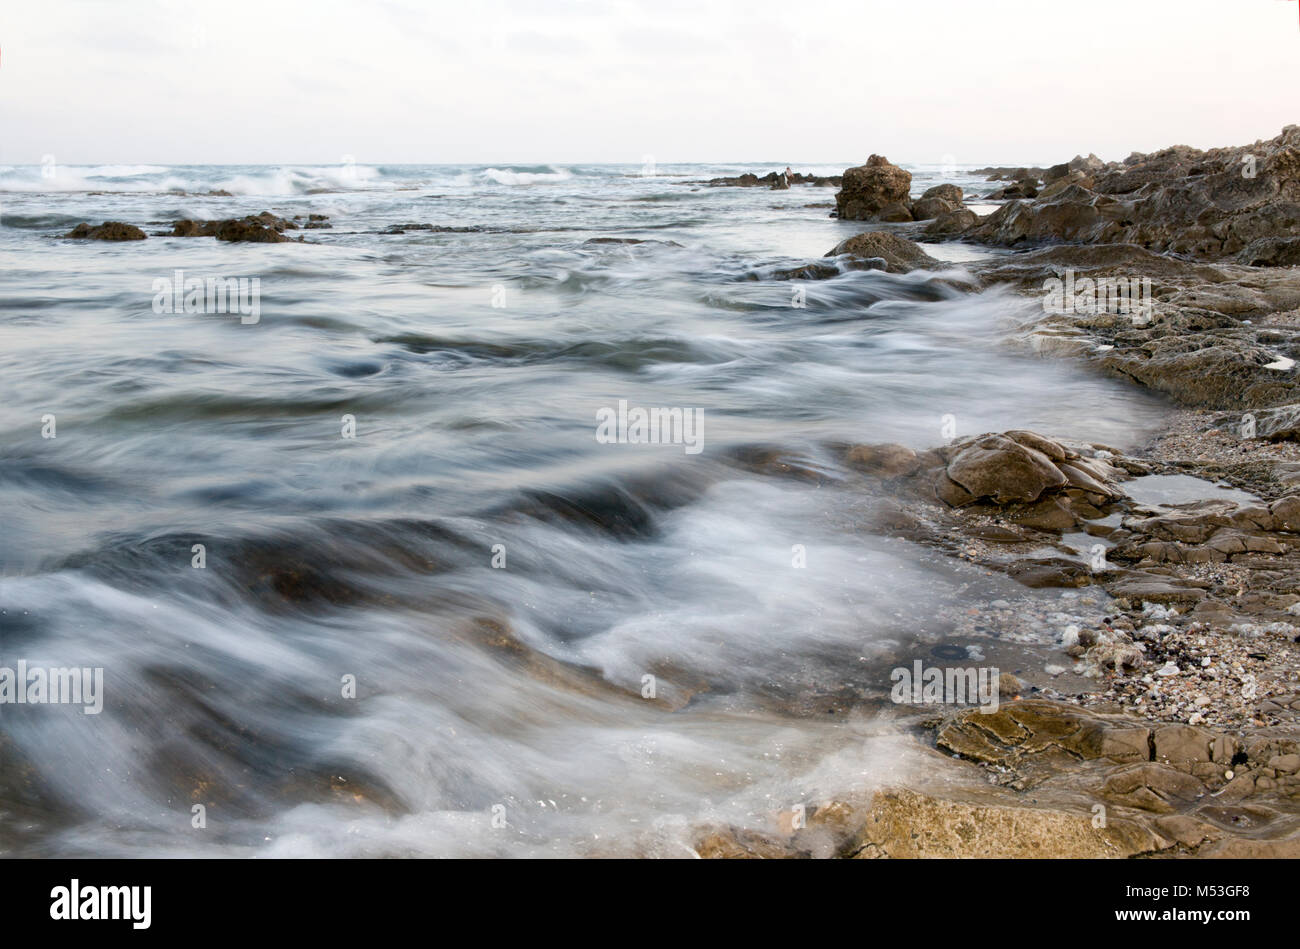 Rocks and sand on the seabed photographed in Israel Stock Photo